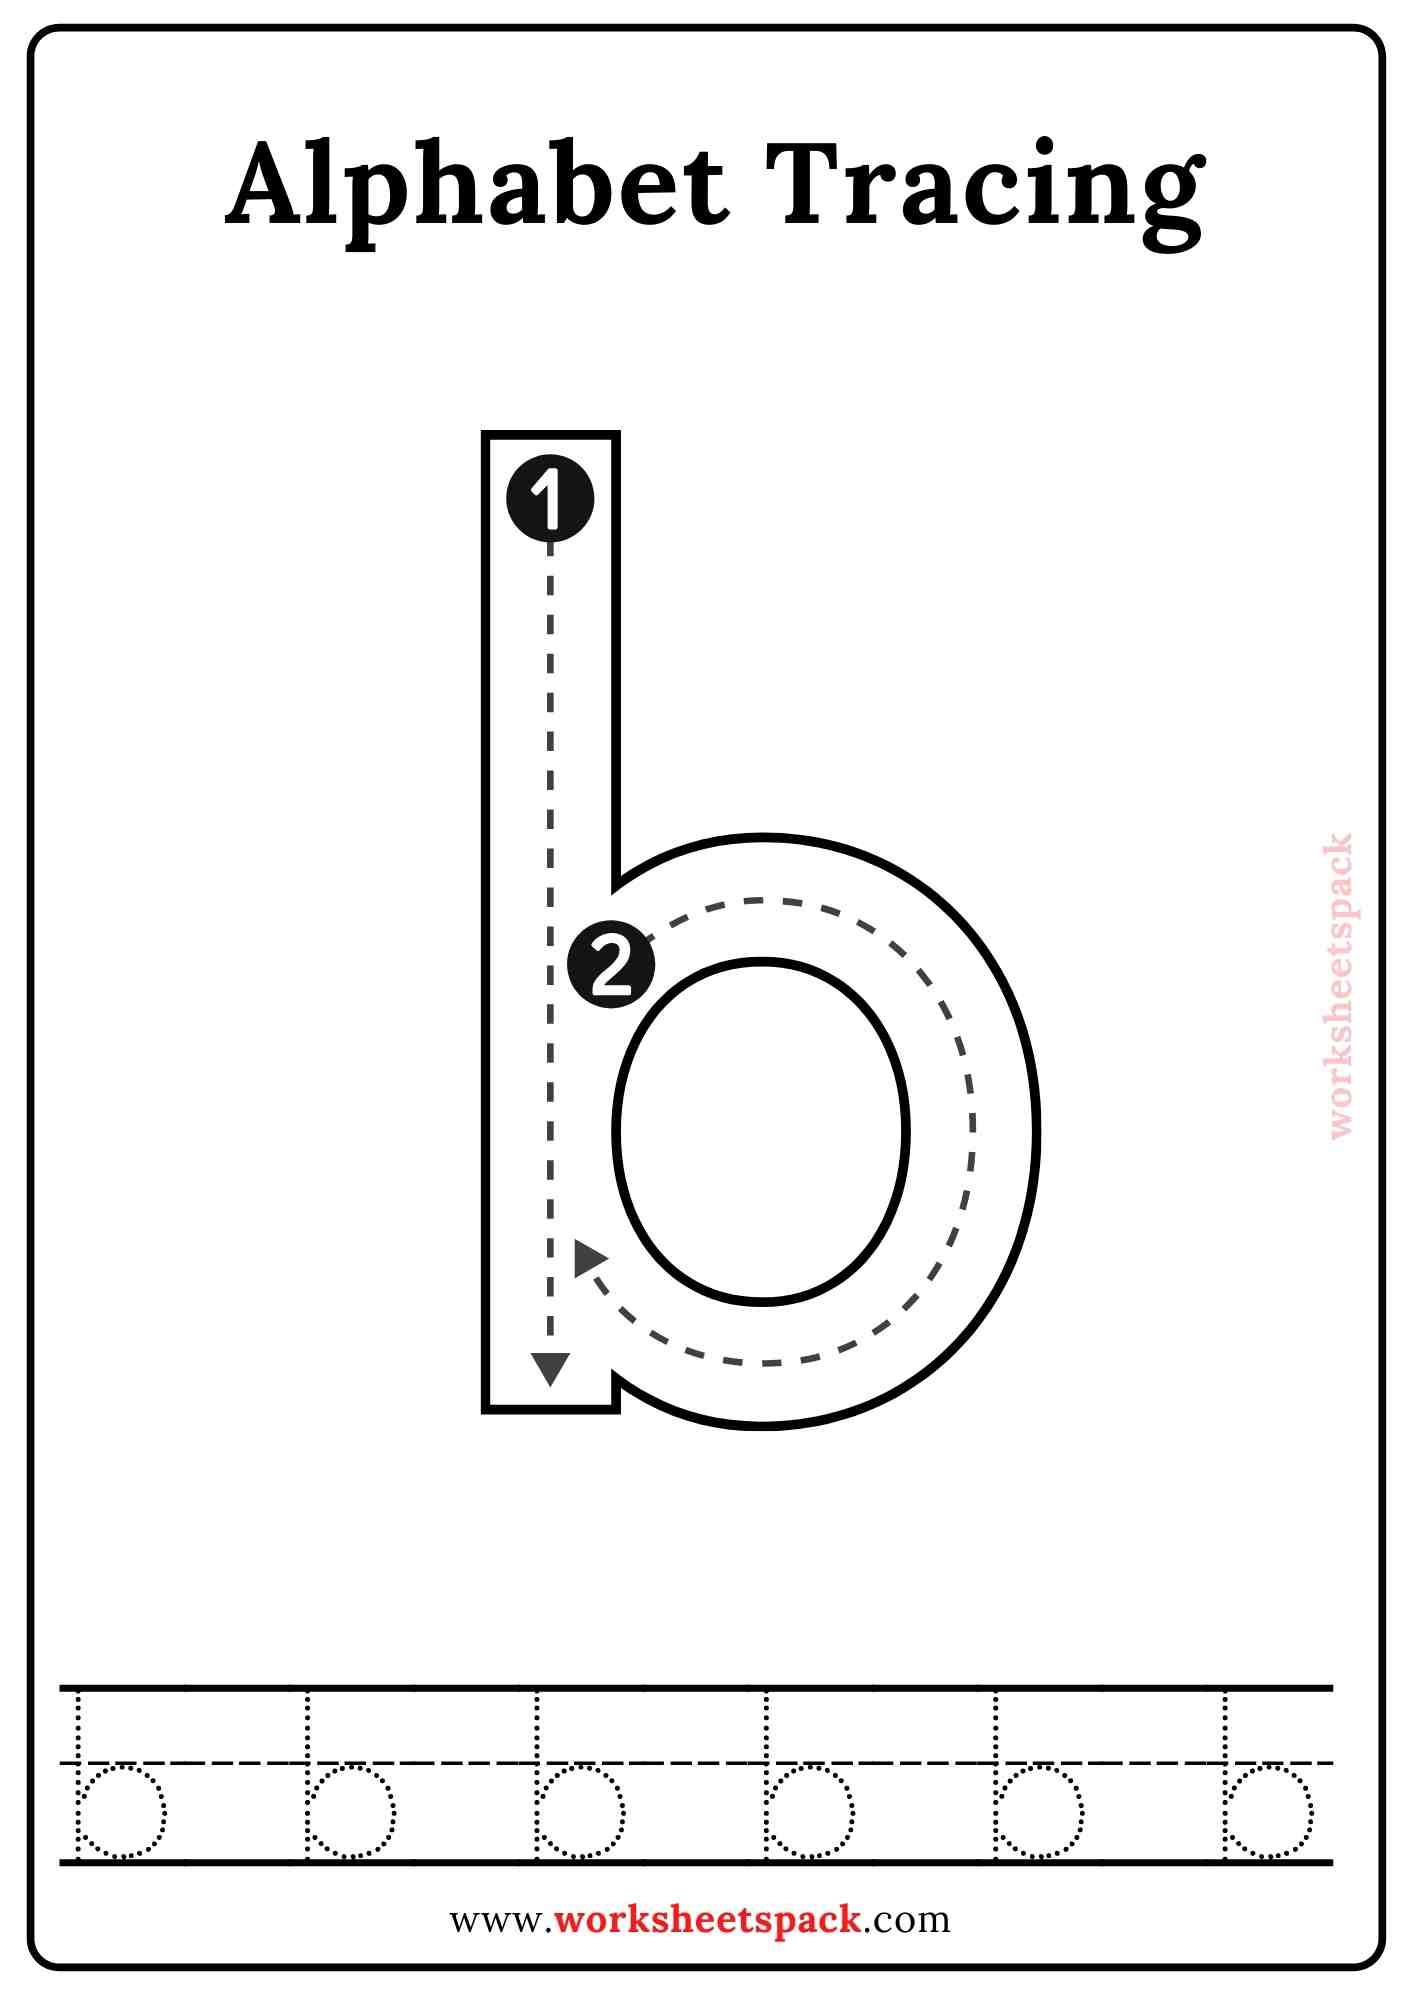 Free Alphabet Tracing Cards Lowercase Letters - worksheetspack